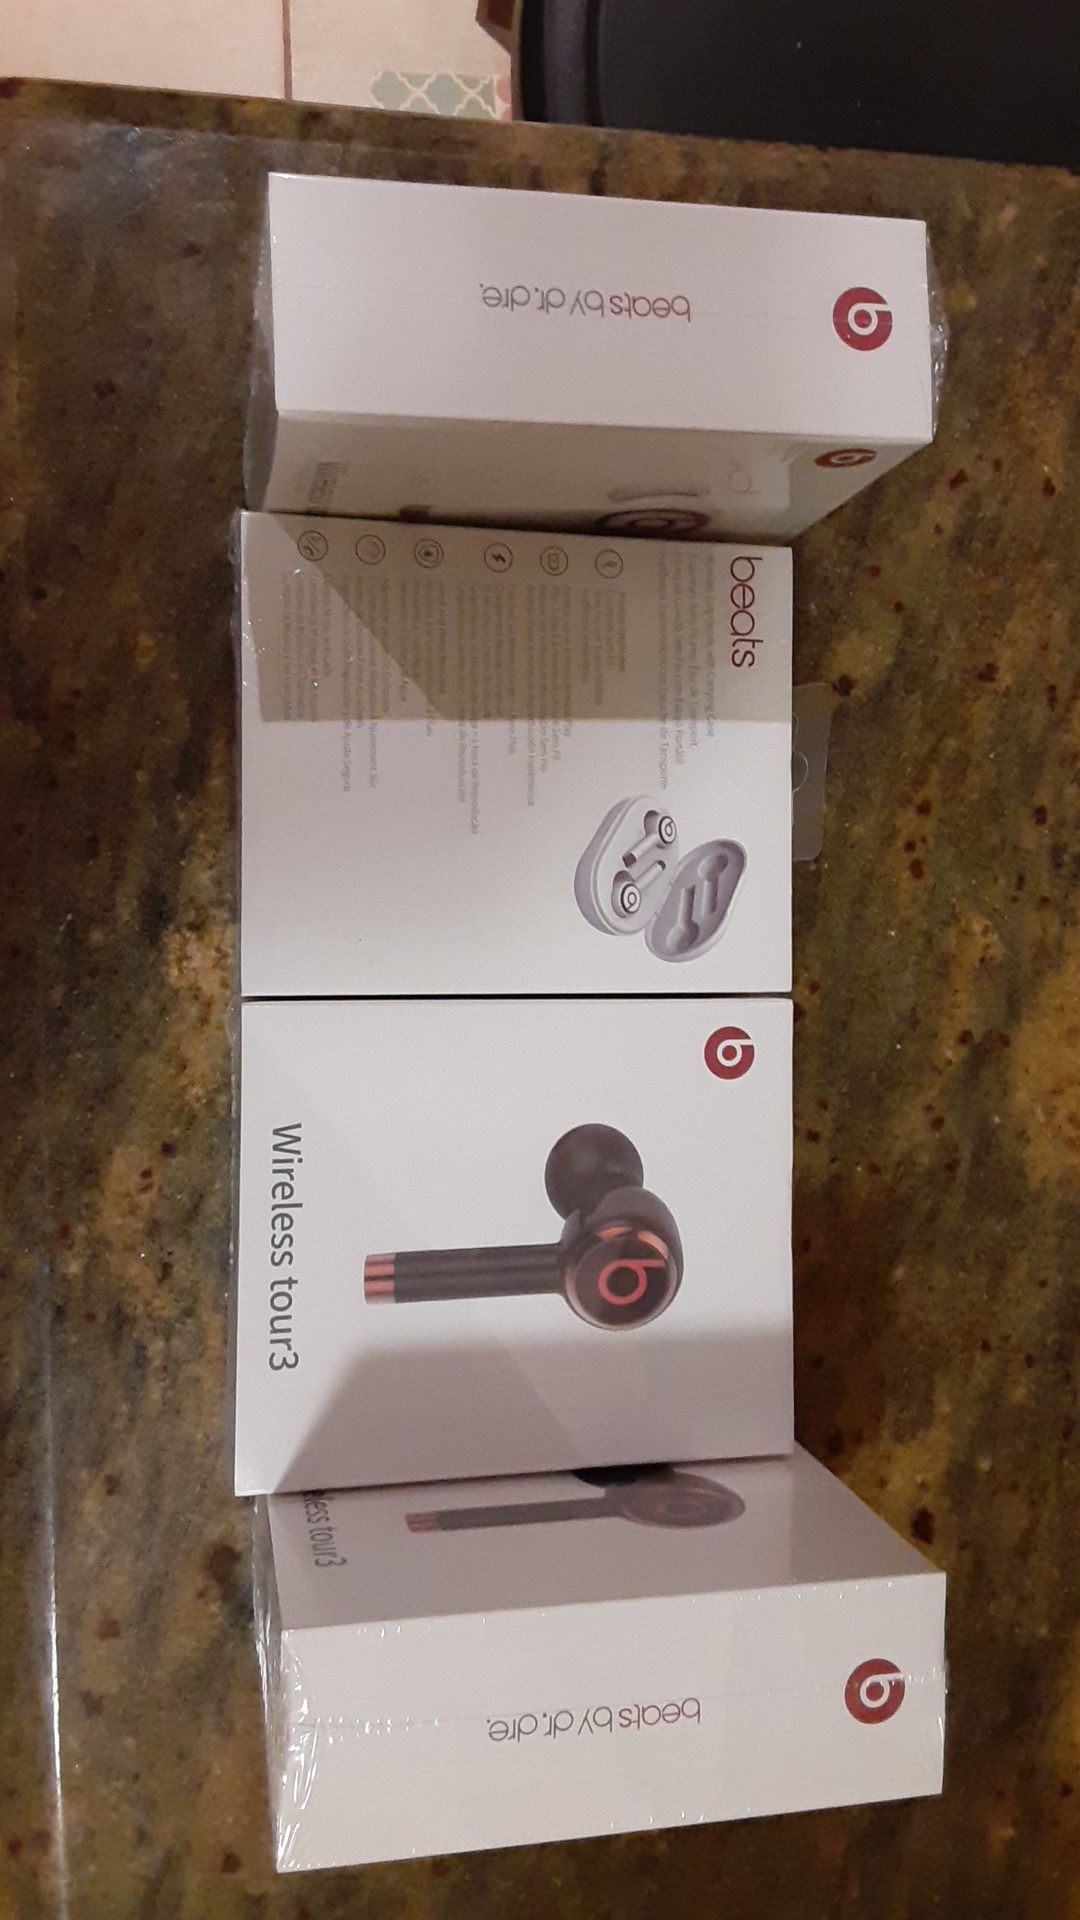 Wireless tour3 beats by dr.dre. brand new in plastic 30$